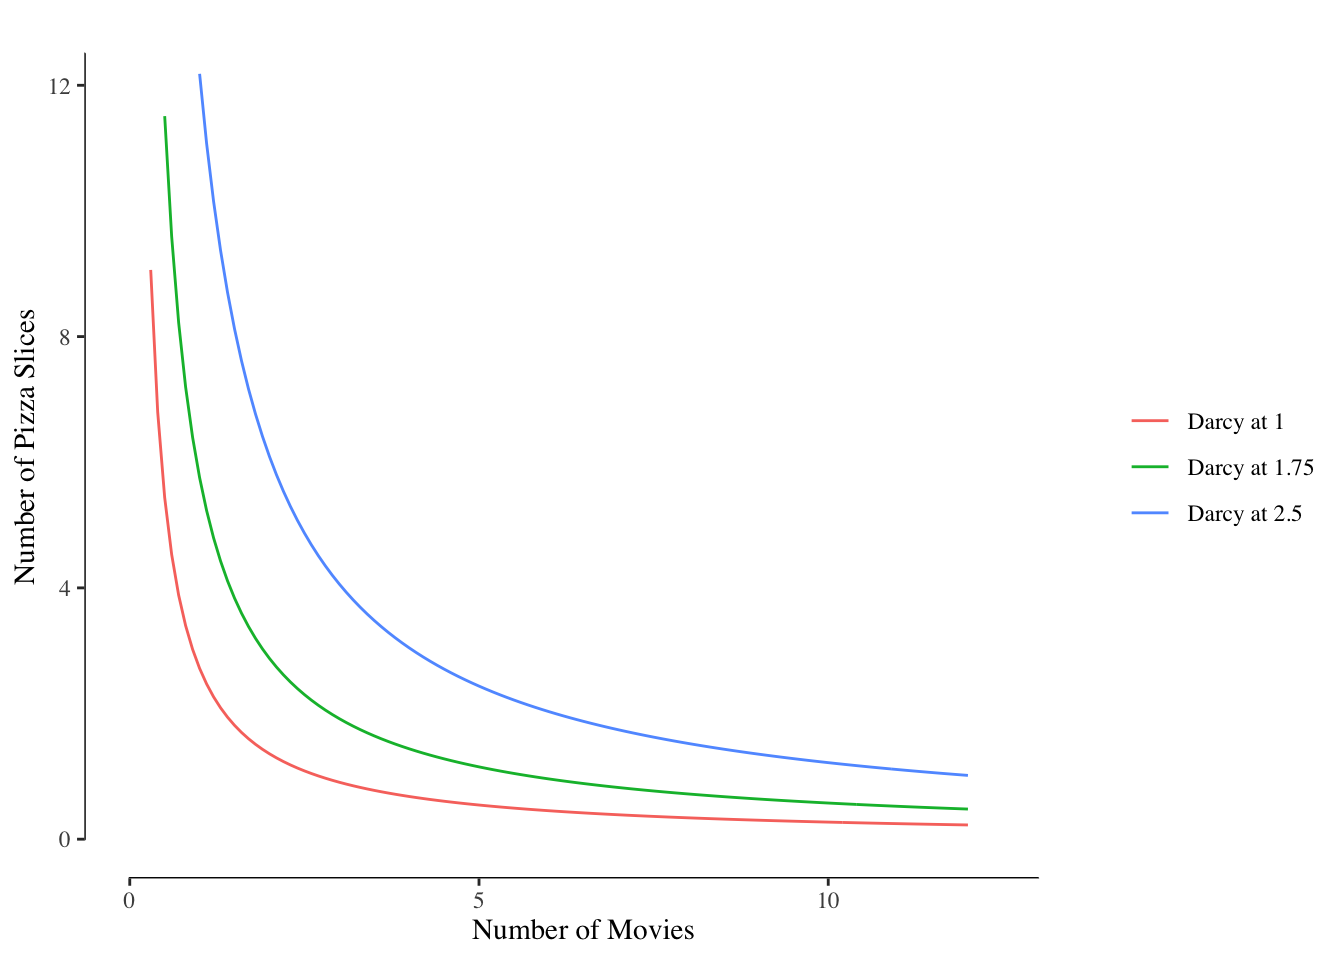 Indifference Curves for Darcy at Different Utility Levels